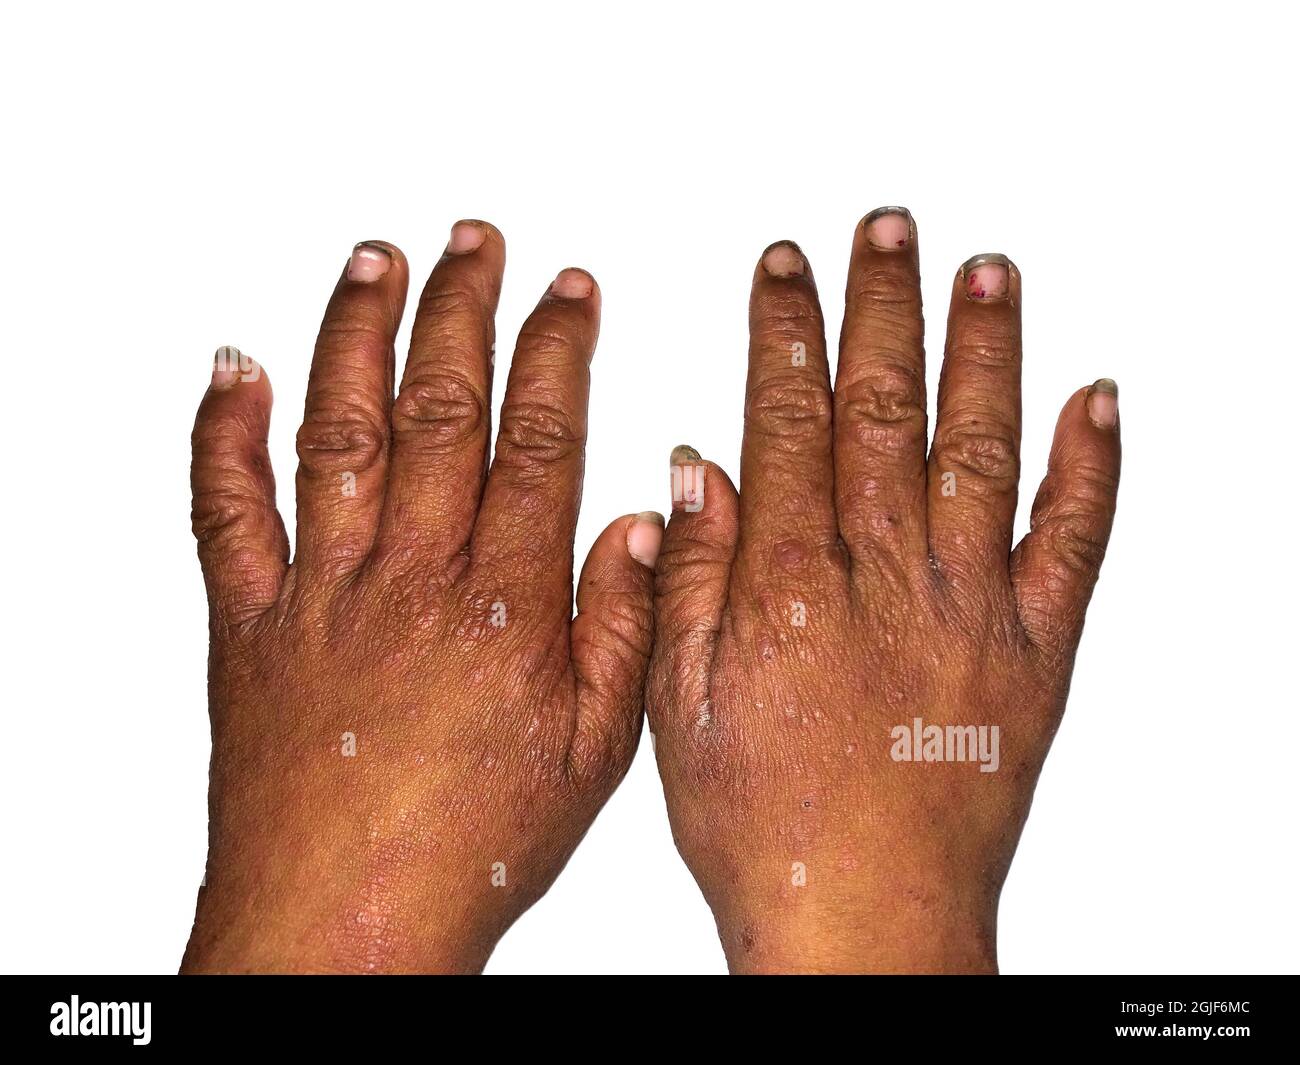 Scabies Infestation in hands of Southeast Asian, Burmese child. Rough and dirty hands. Isolated on white. Stock Photo